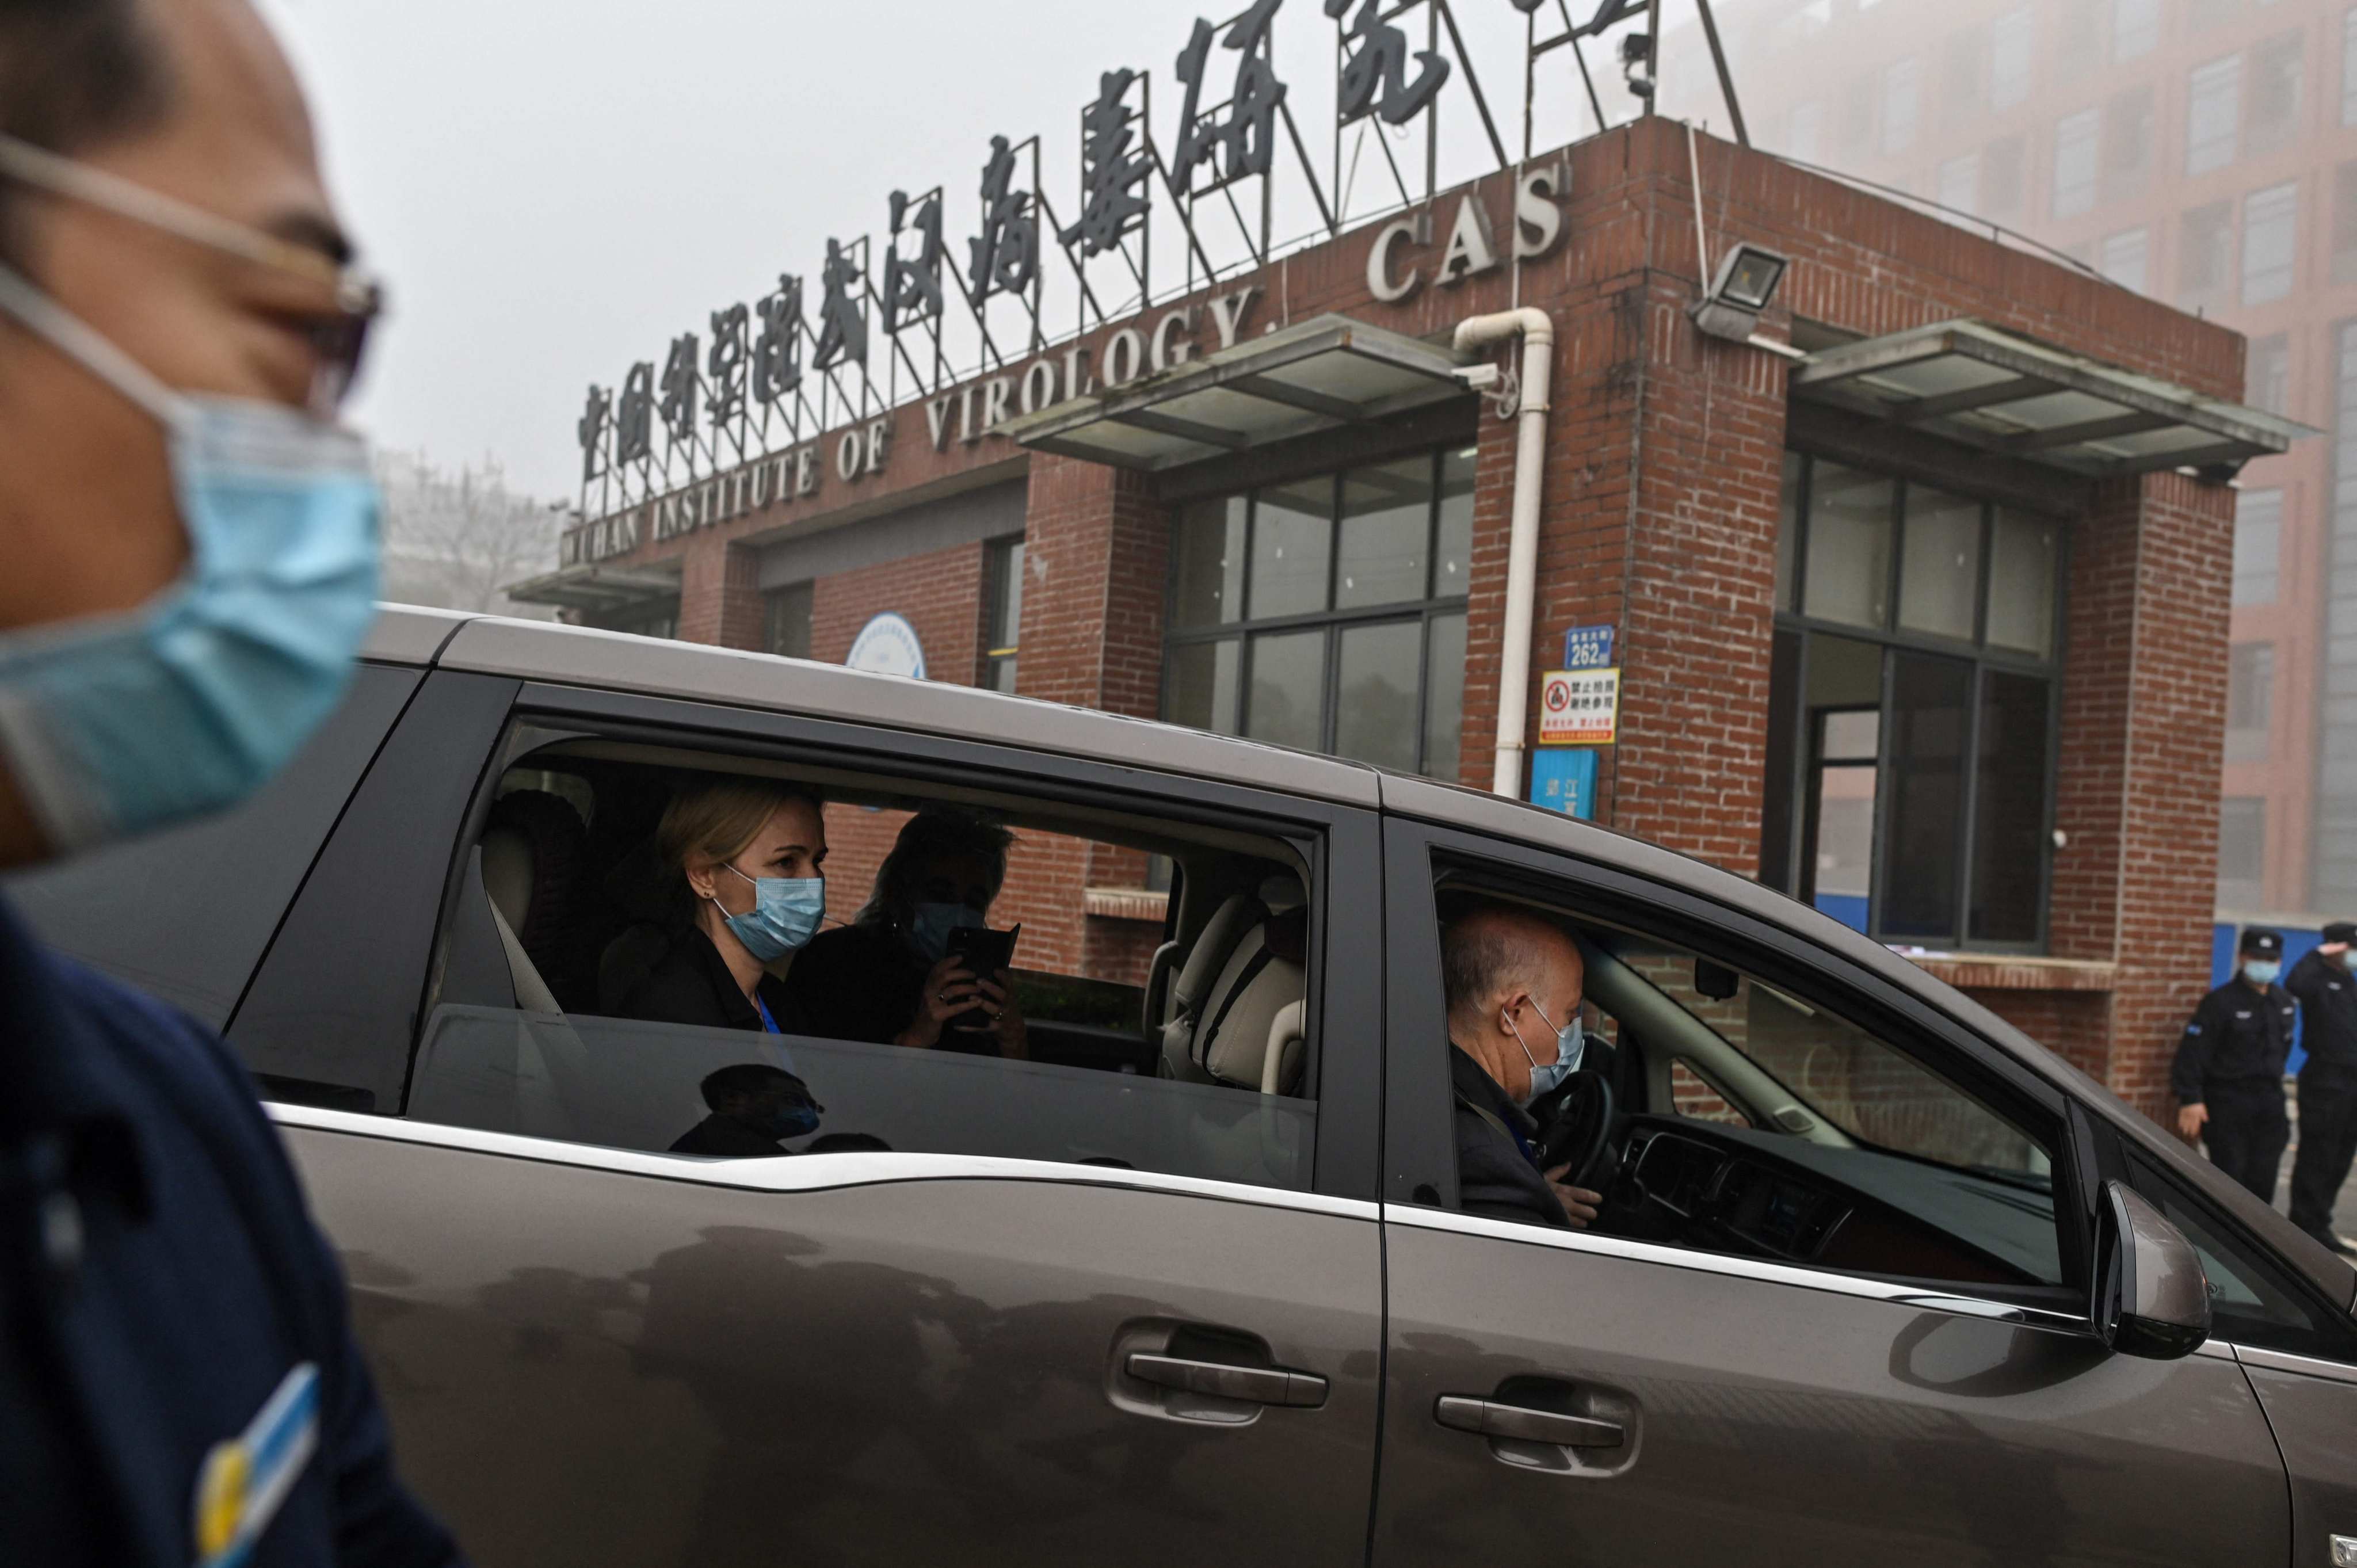 Members of the WHO team investigating the origins of Covid-19 visit the Wuhan Institute of Virology in China’s Hubei province on February 3. Photo: AFP